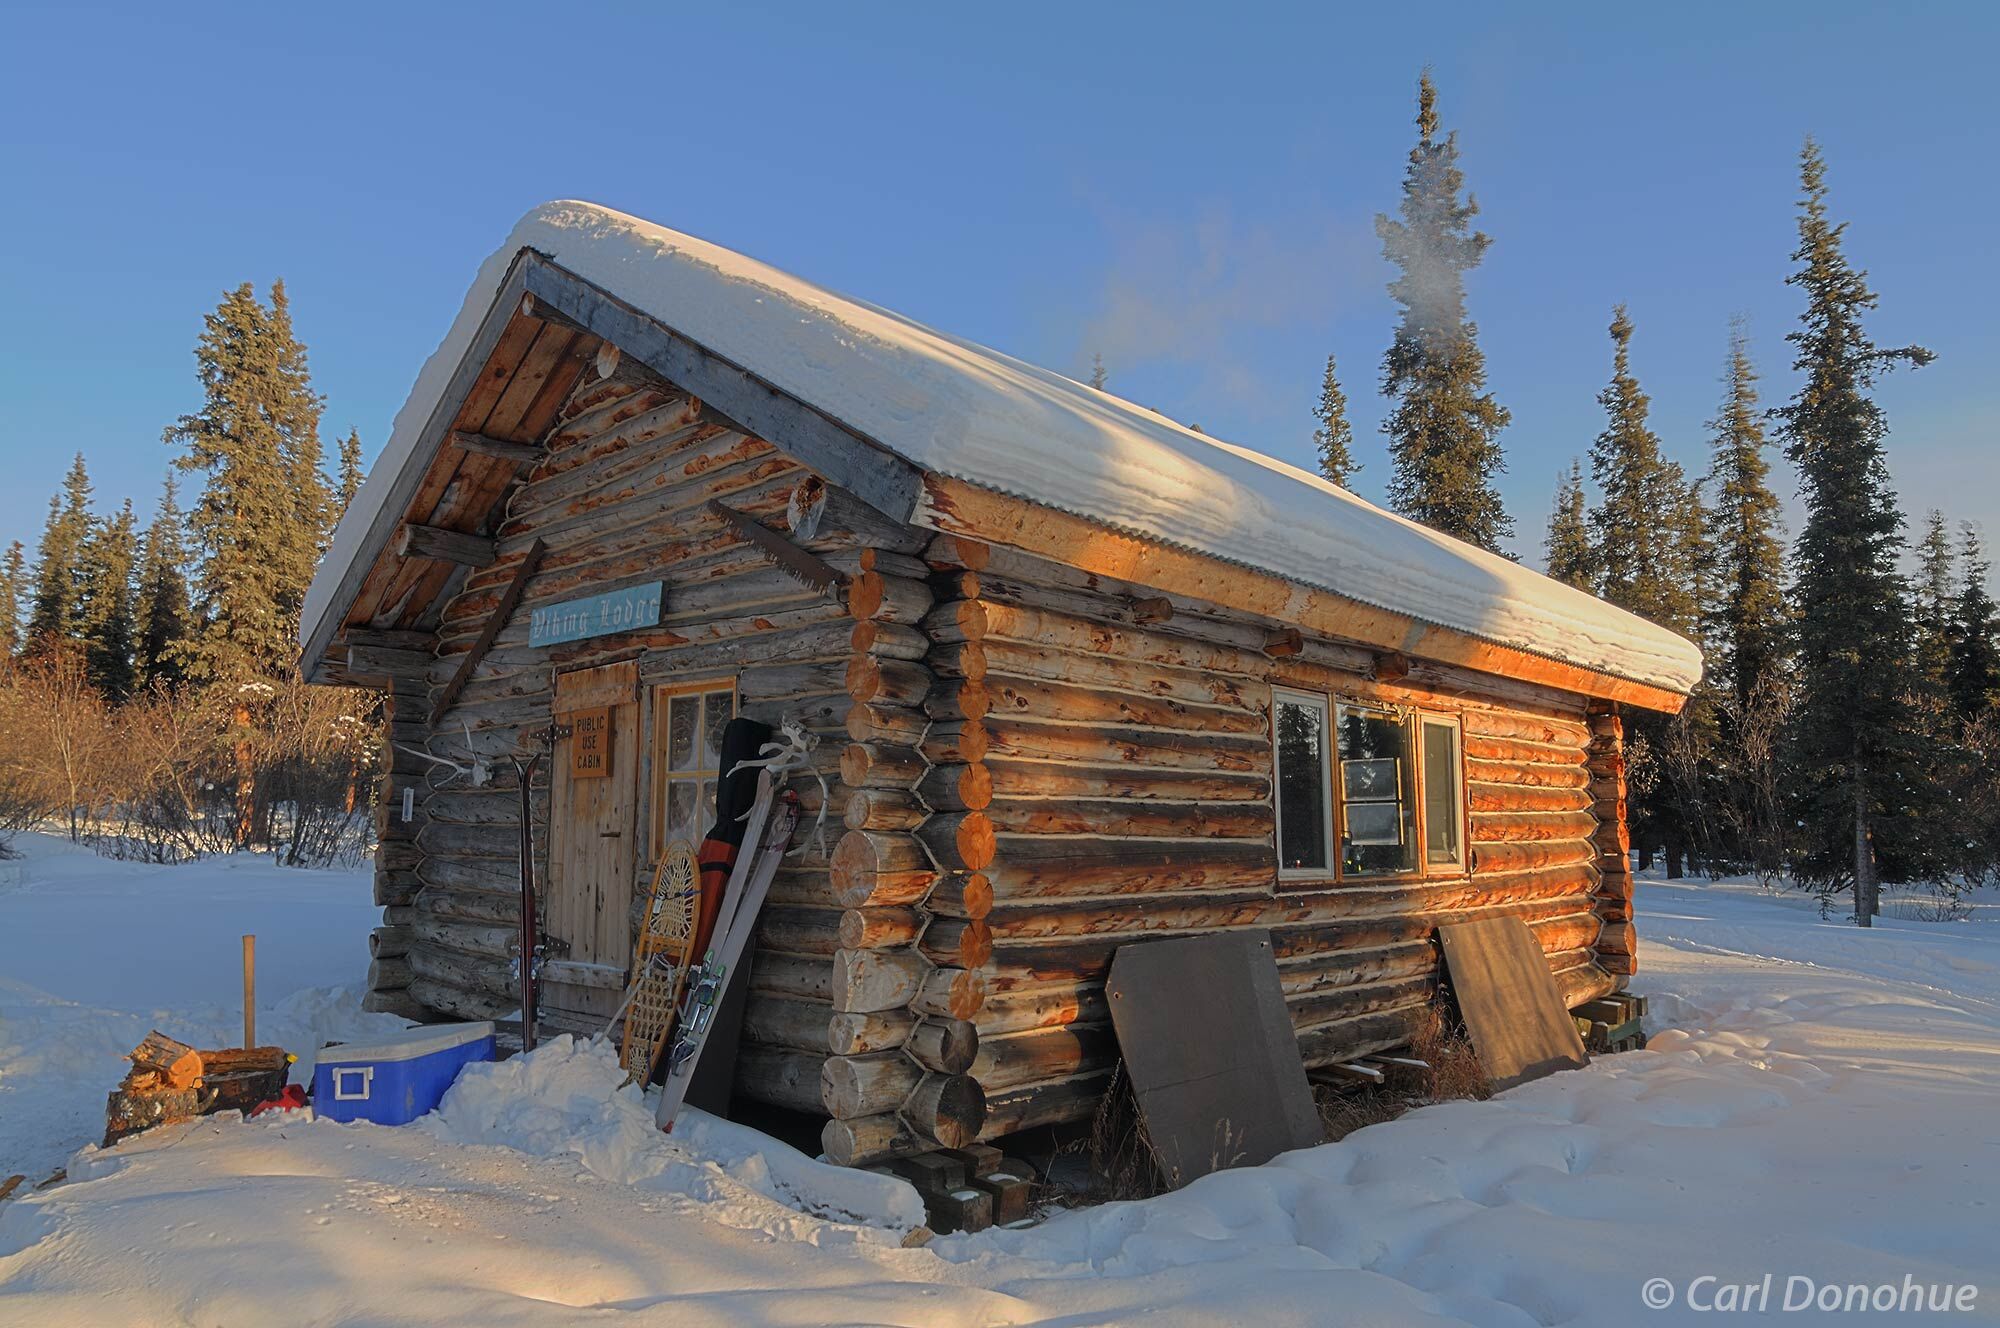 Winter in Alaska. The Viking Lodge Cabin, a public use cabin in Wrangell-St. Elias National Park and Preserve makes a fantastic...